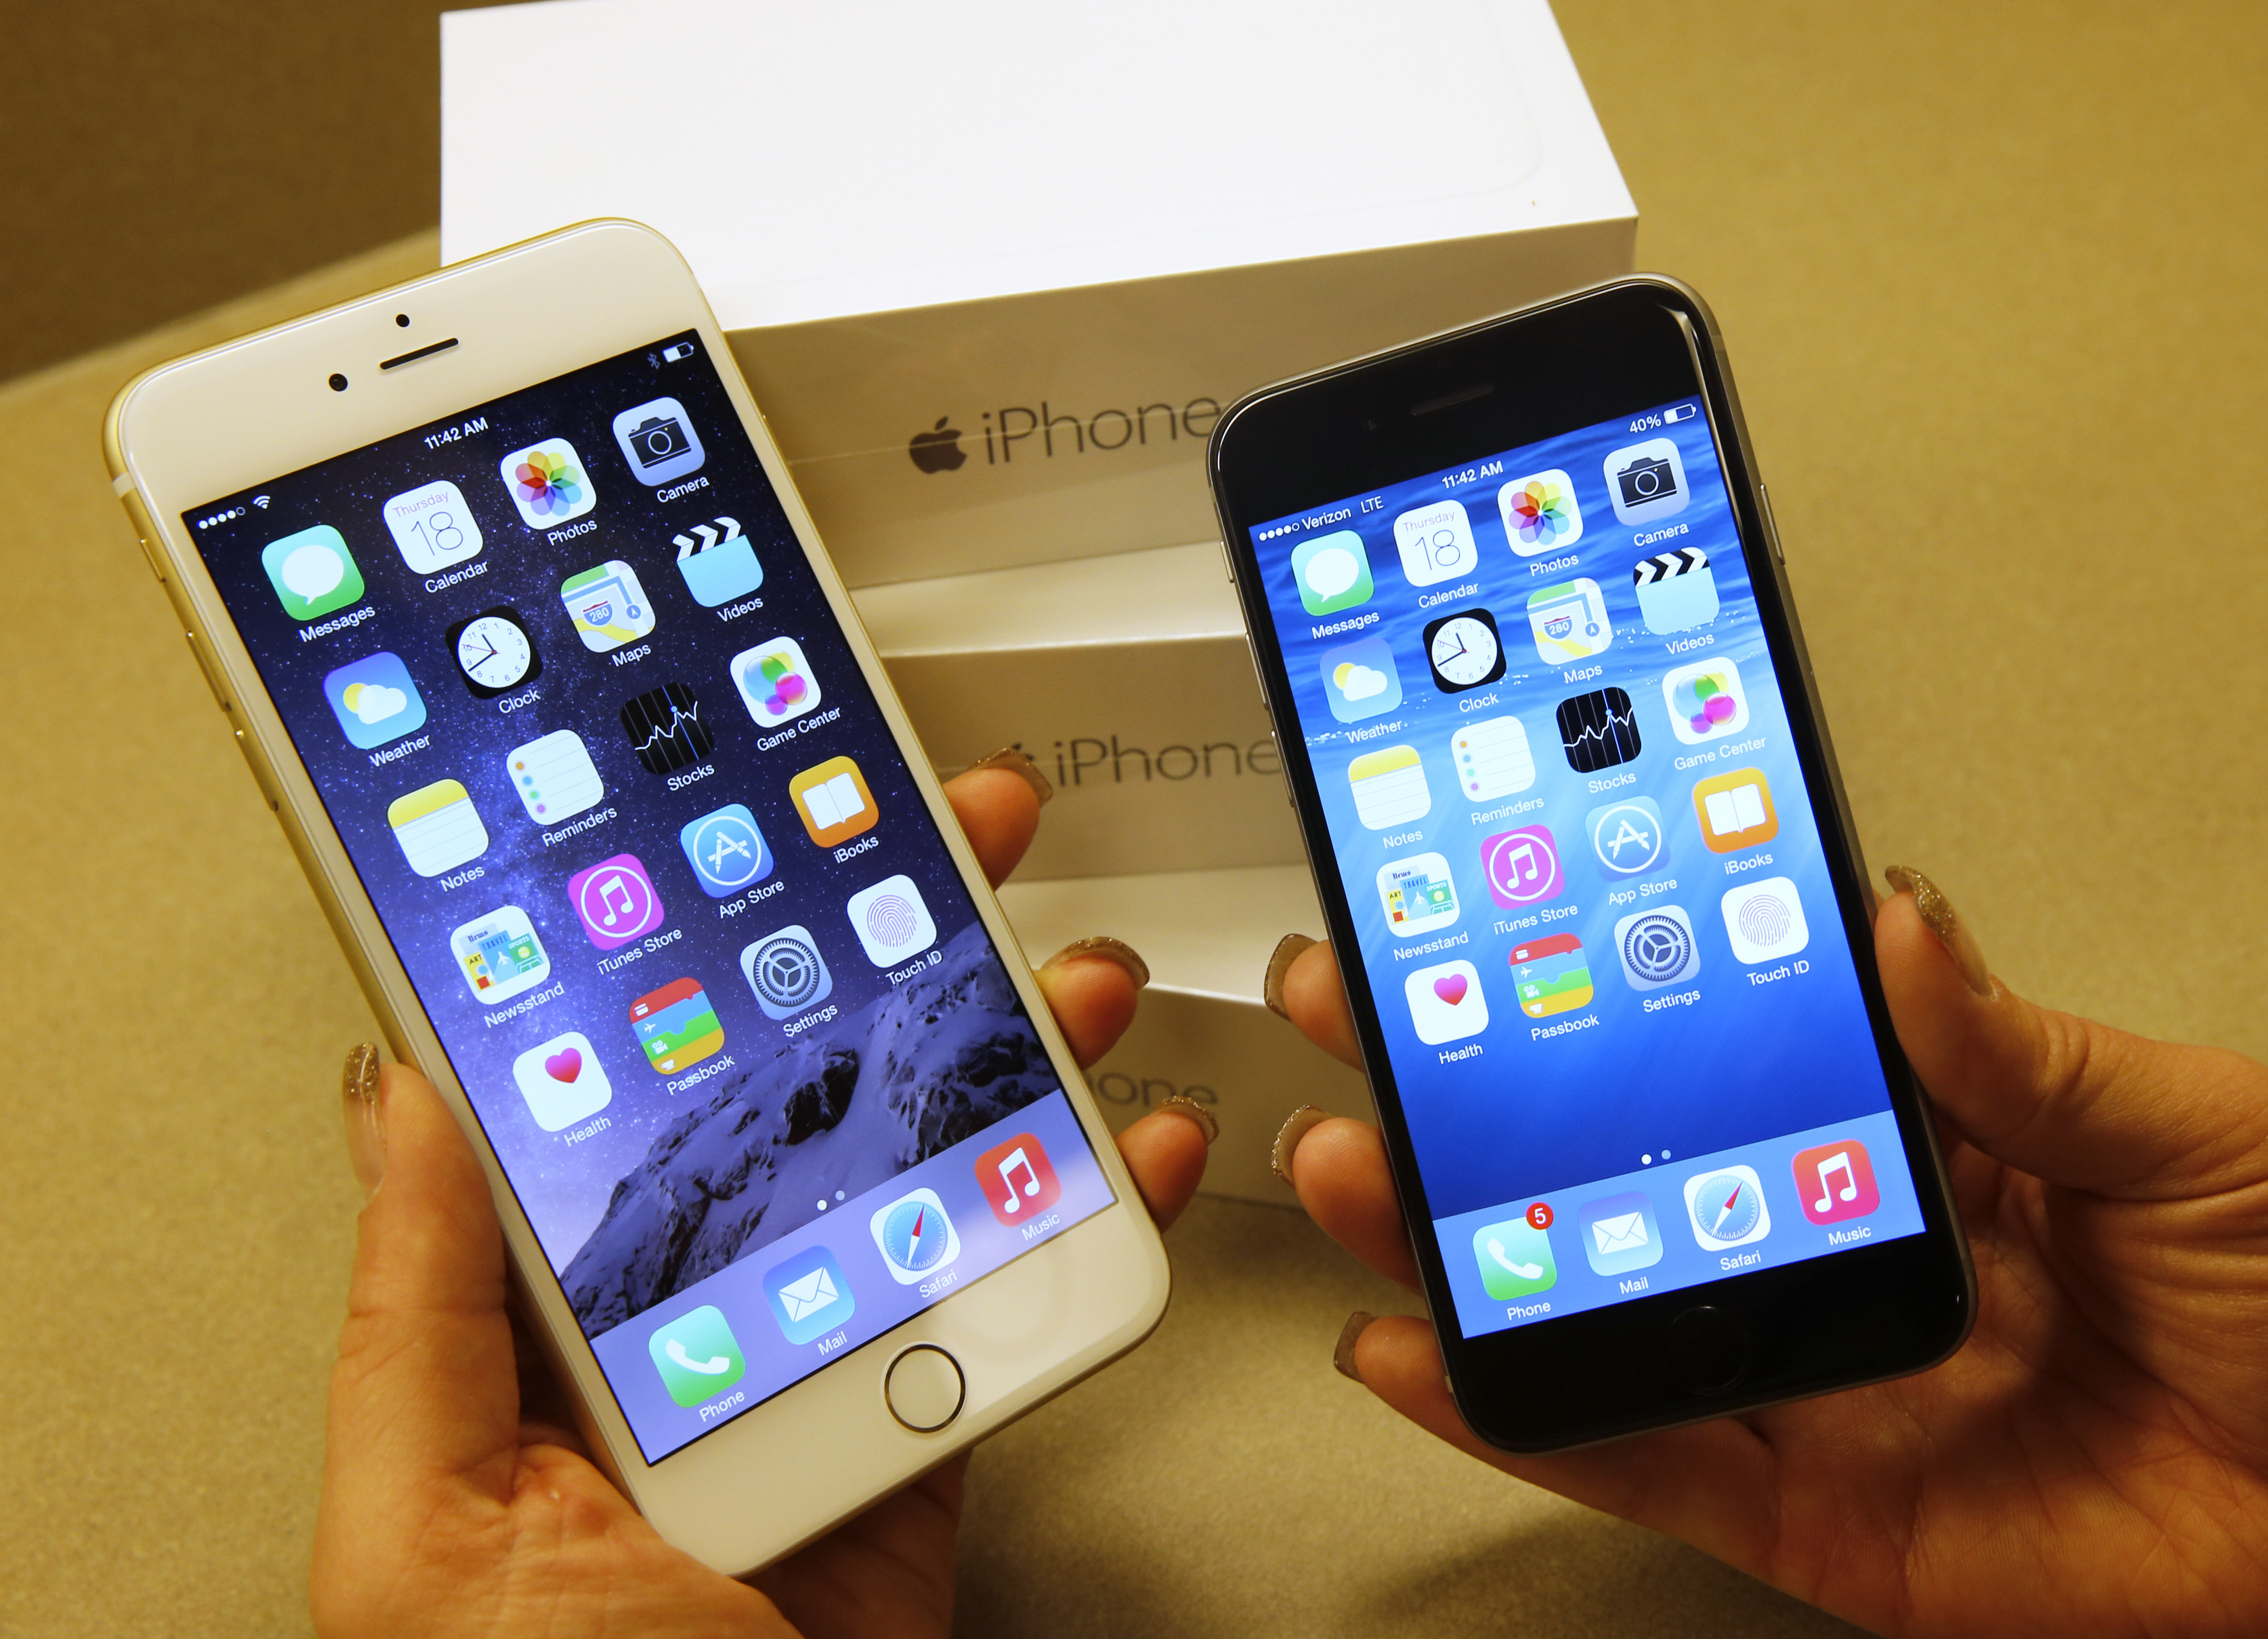 Apple's  iPhone 6 (R) and iPhone 6 Plus (L) phones are shown together at a Verizon store in Orem, Utah on September 18, 2014 in Orem, Utah. (George Frey—Getty Images)